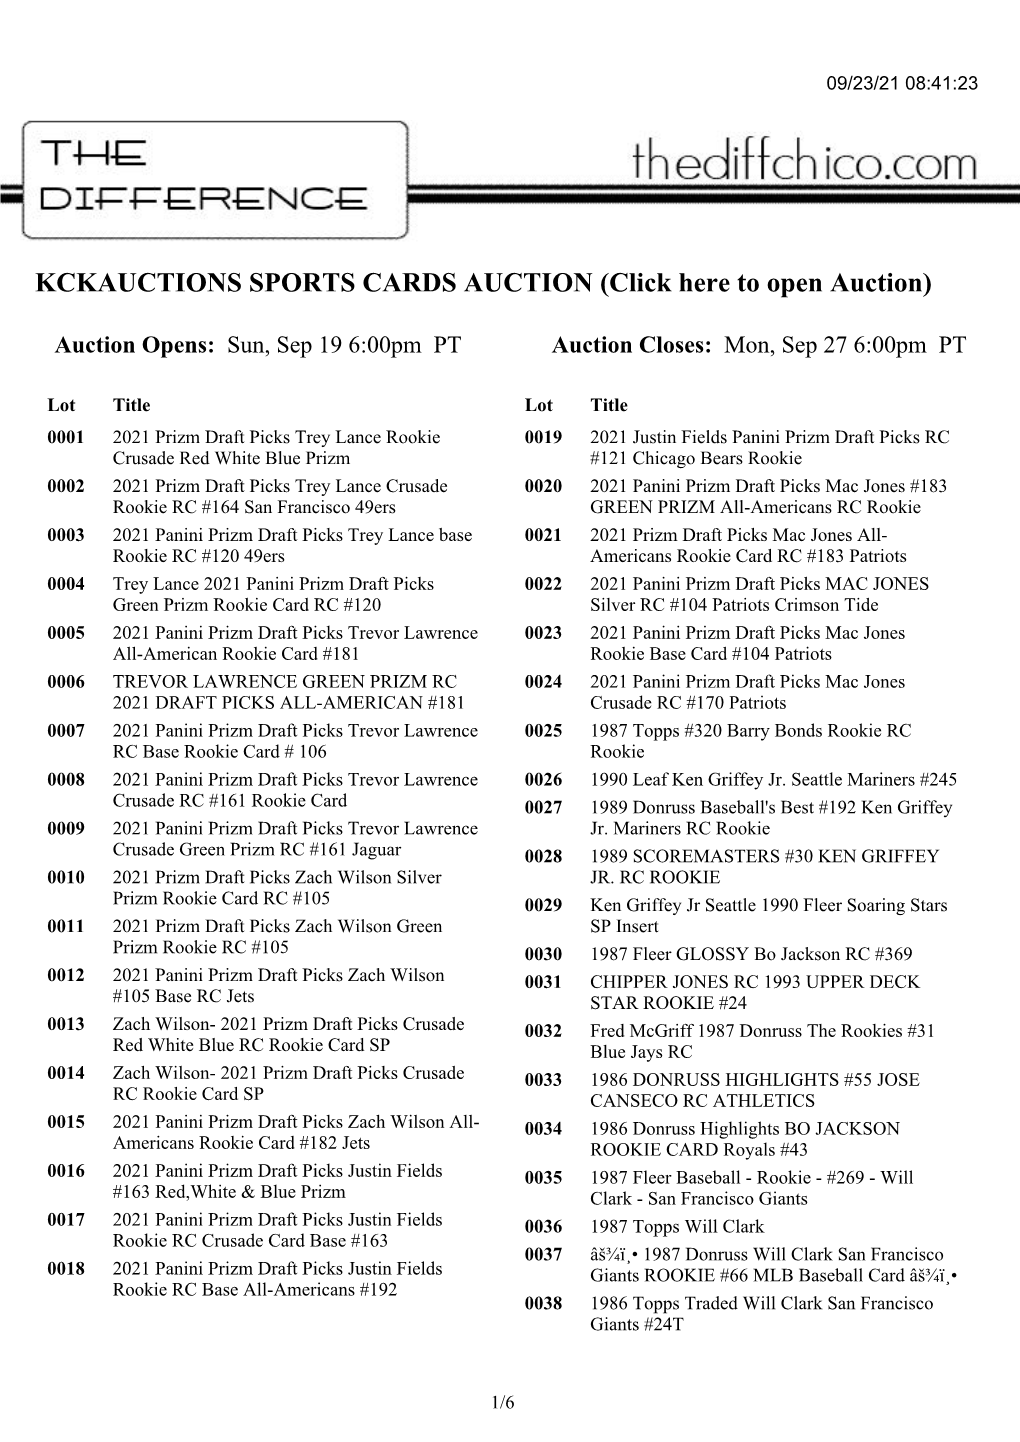 Kckauctions Upcoming Sportscards Auction